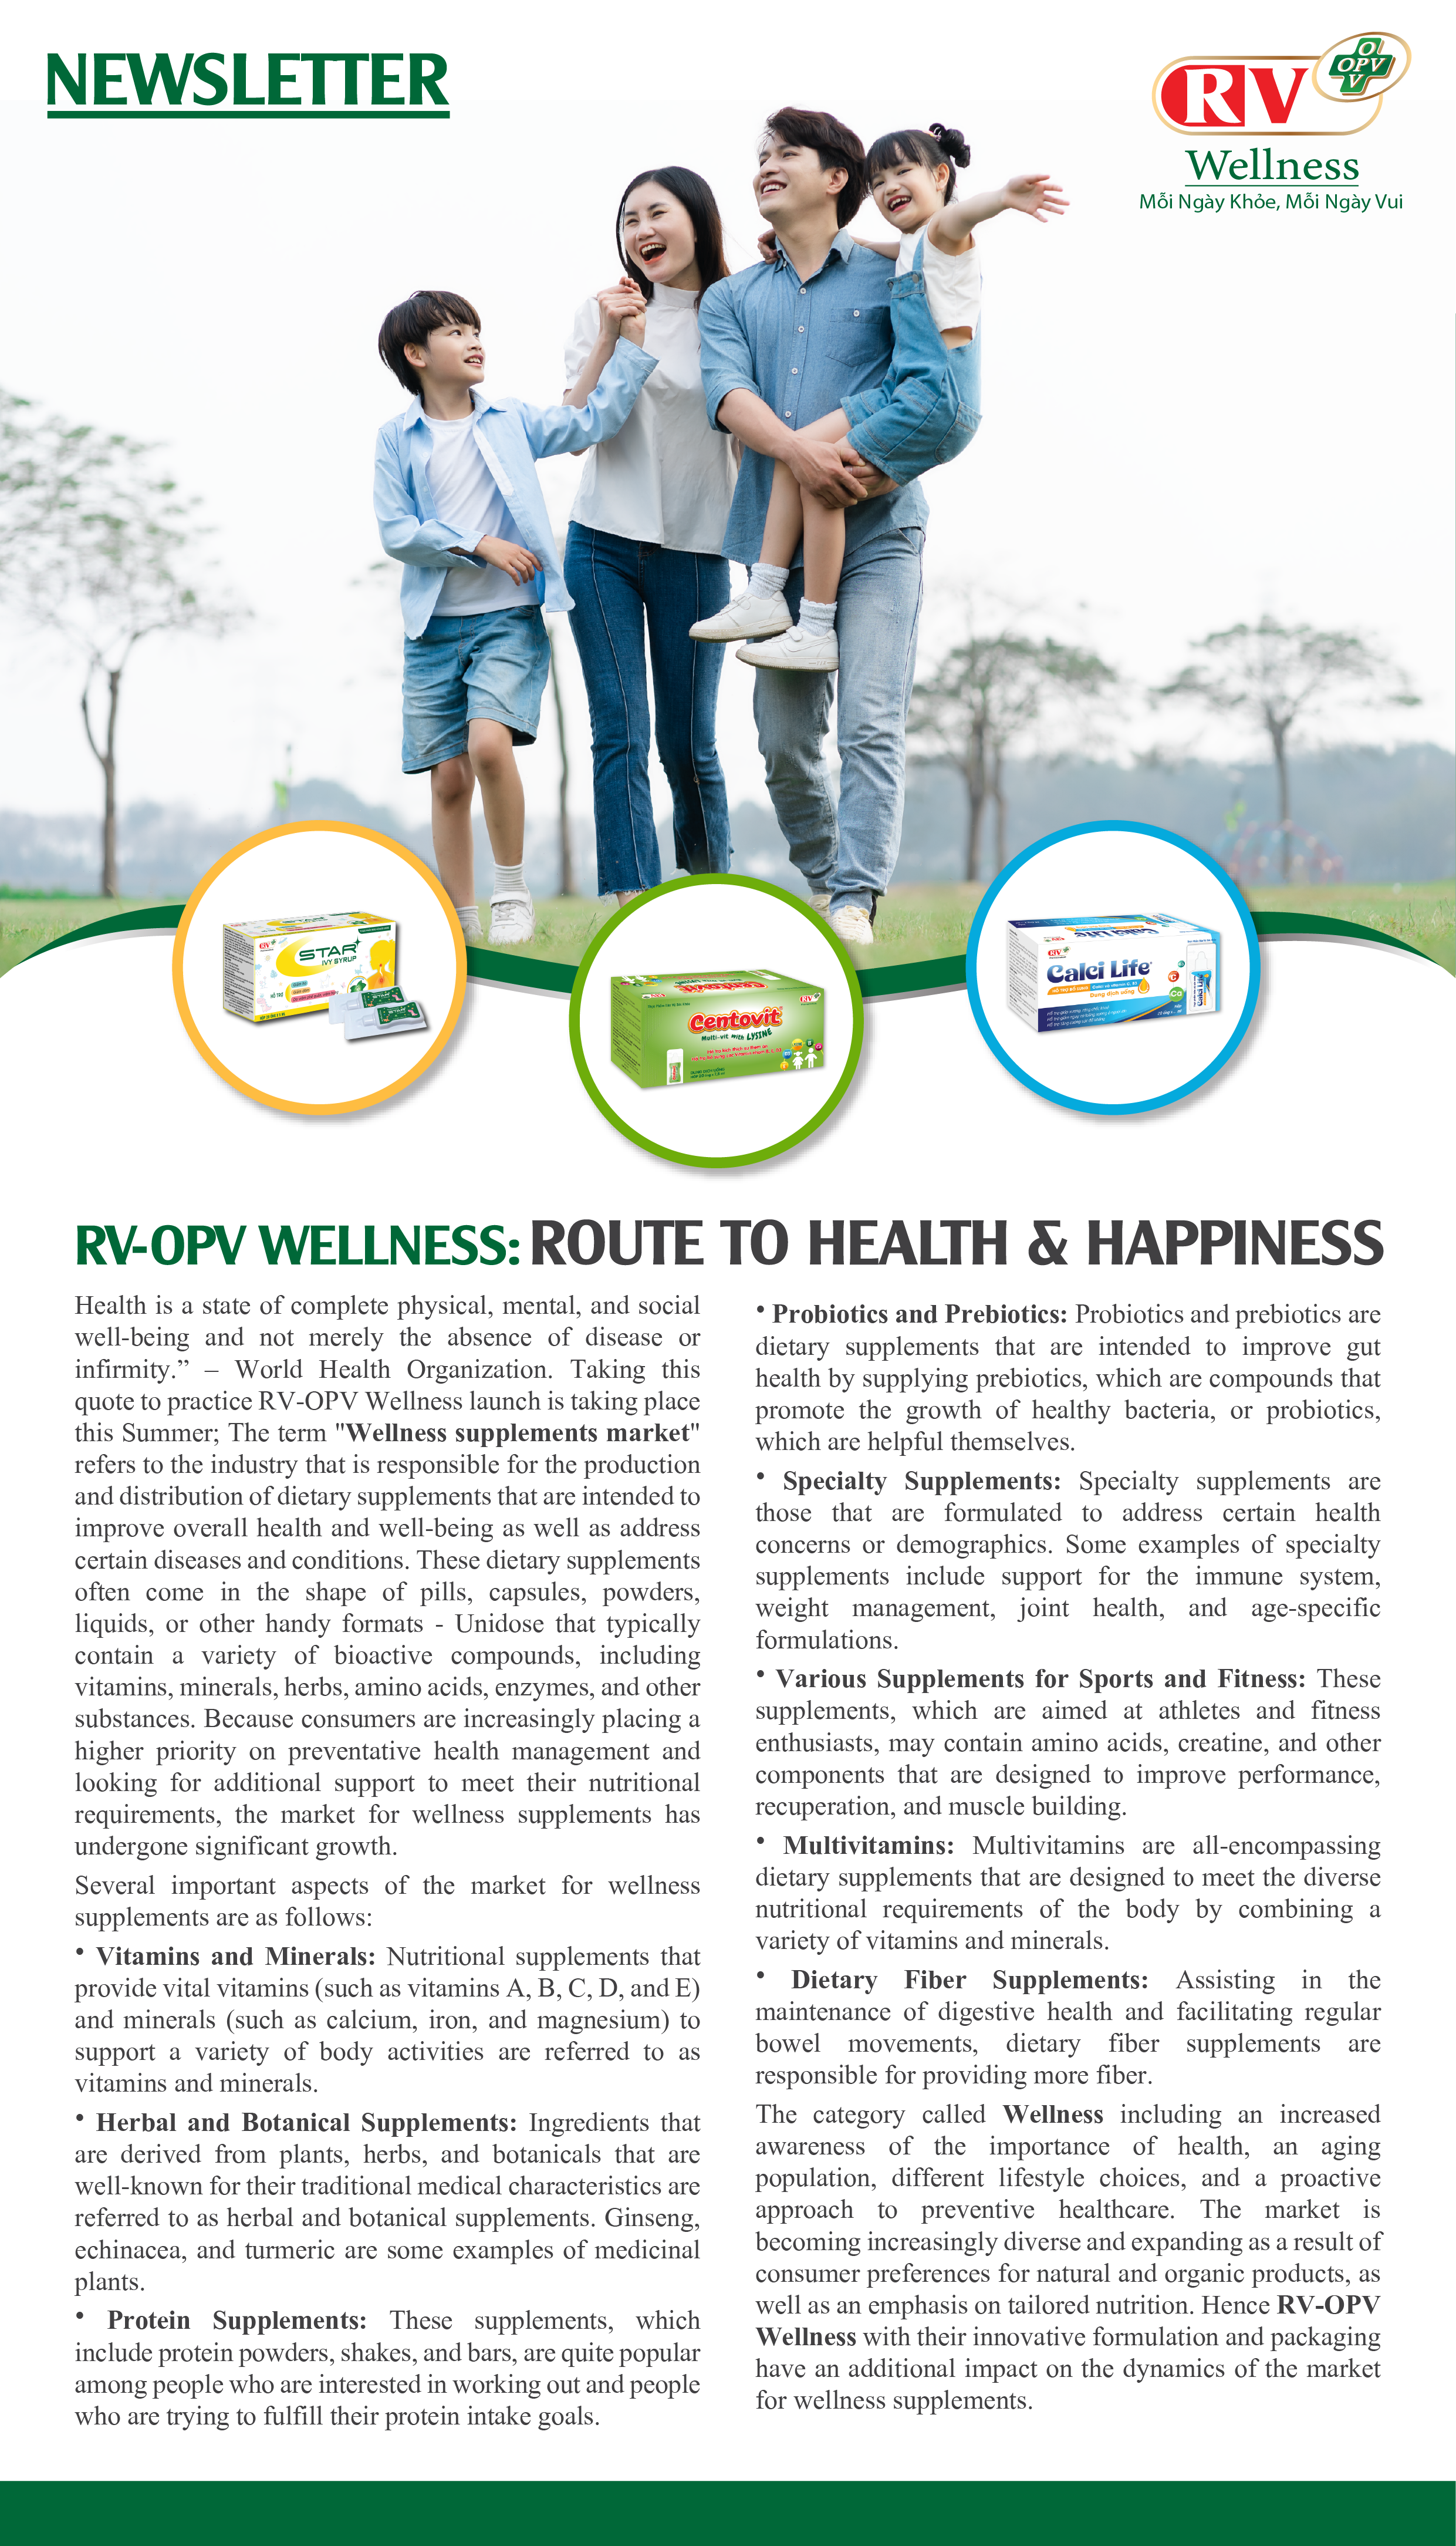 RV-OPV WELLNESS: ROUTE TO HEALTH & HAPPINESS